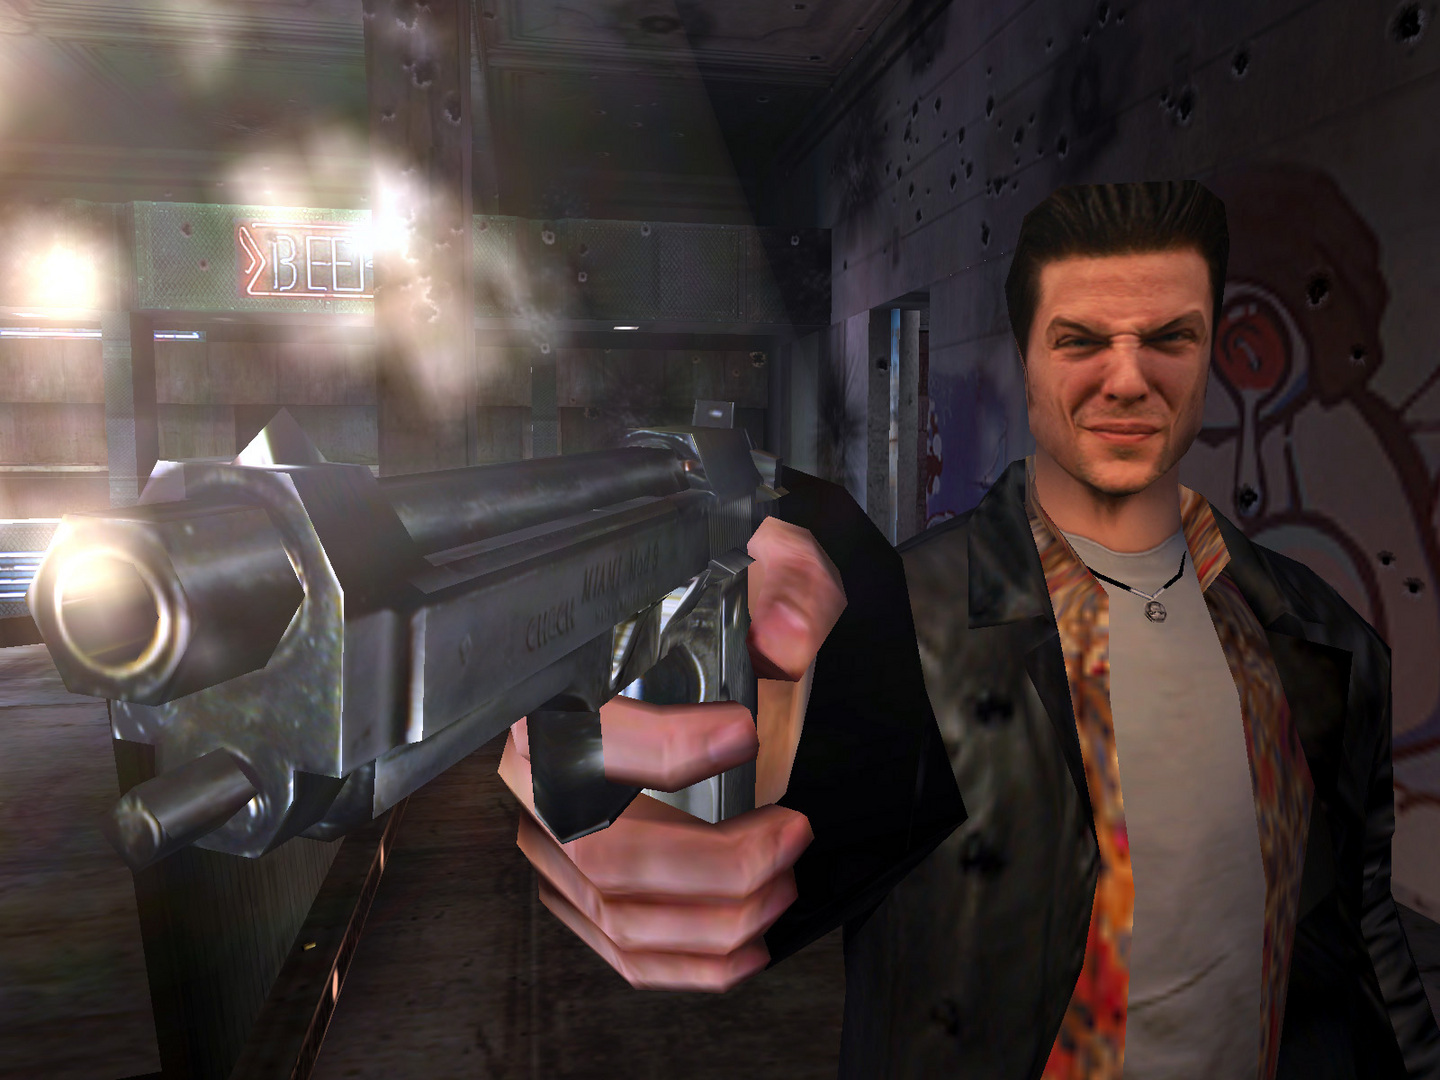 Max Payne Mobile - Apps on Google Play